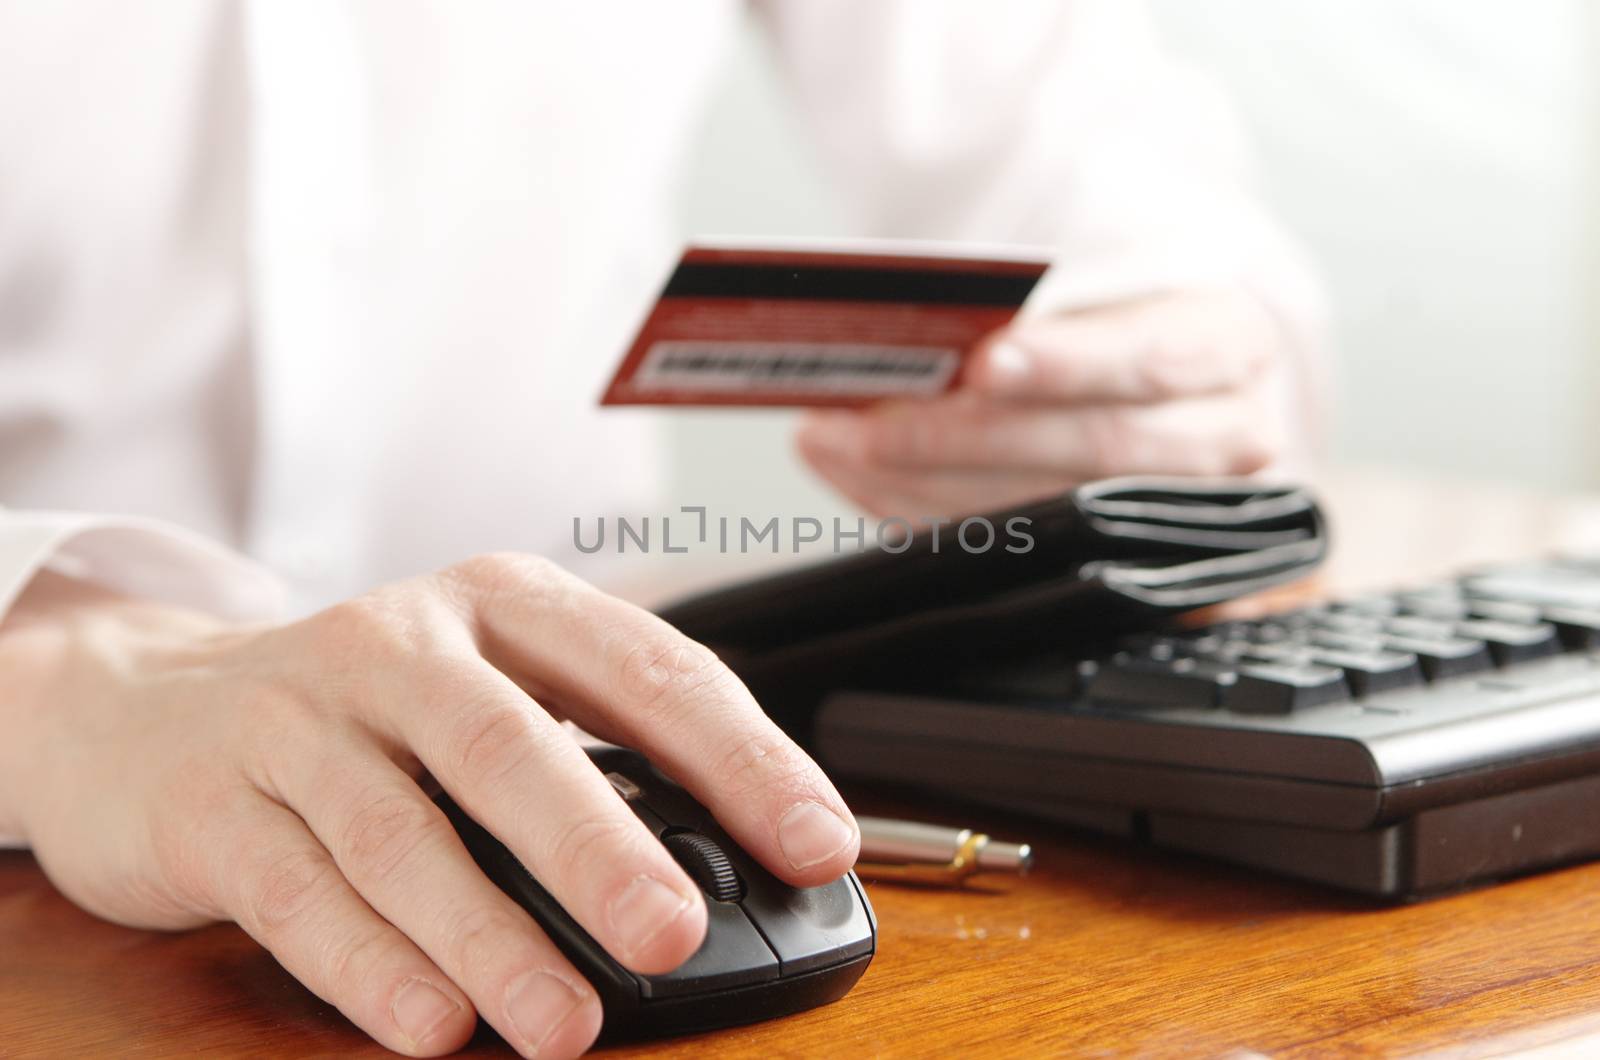 Hands of businessman with purse and bank card on the computer keyboard by Ravenestling